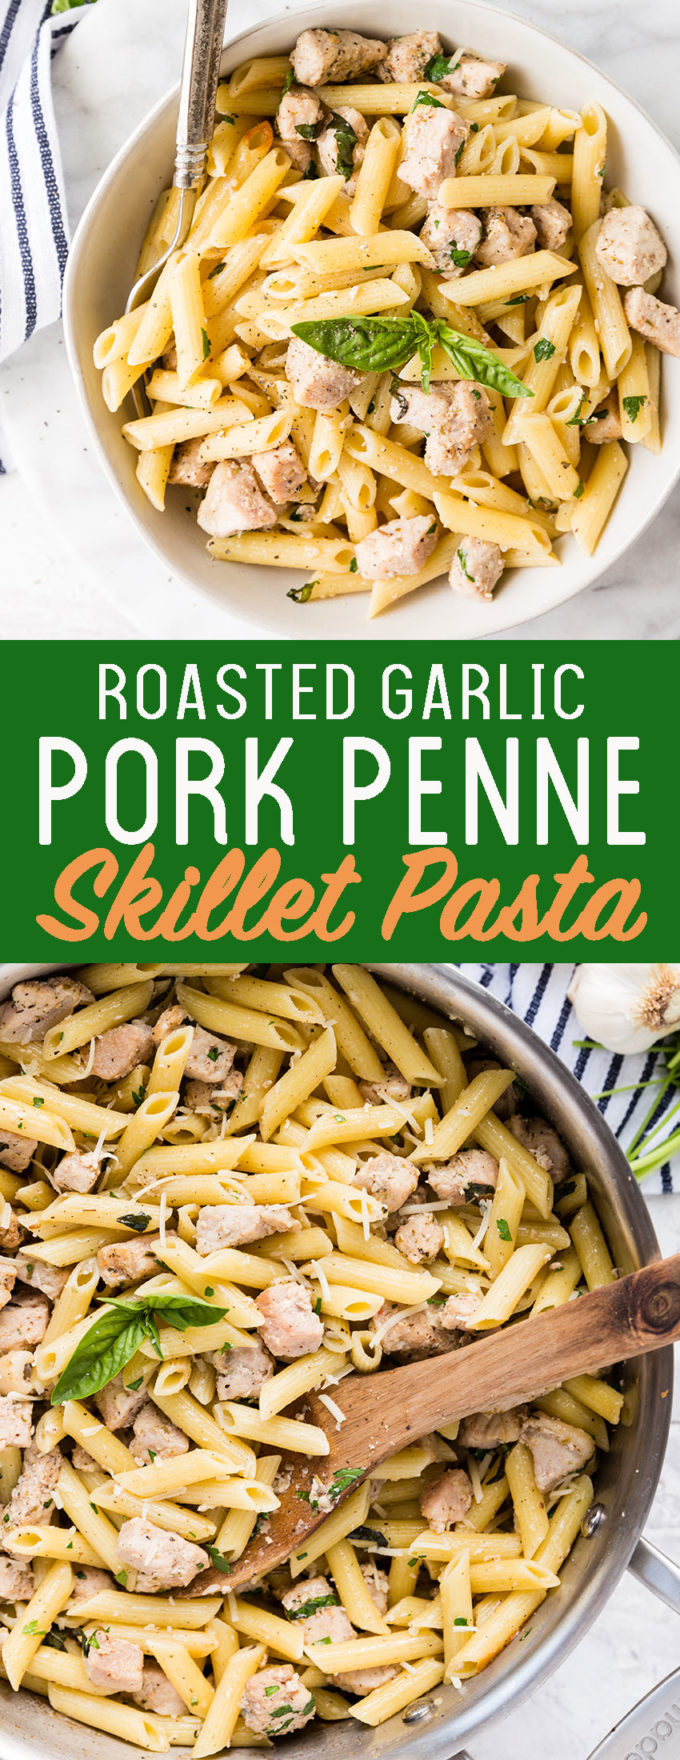 A quick and easy dinner, this Roasted Garlic and Herb Penne Pasta with Pork is a hit and can be made in under 30 minutes. 